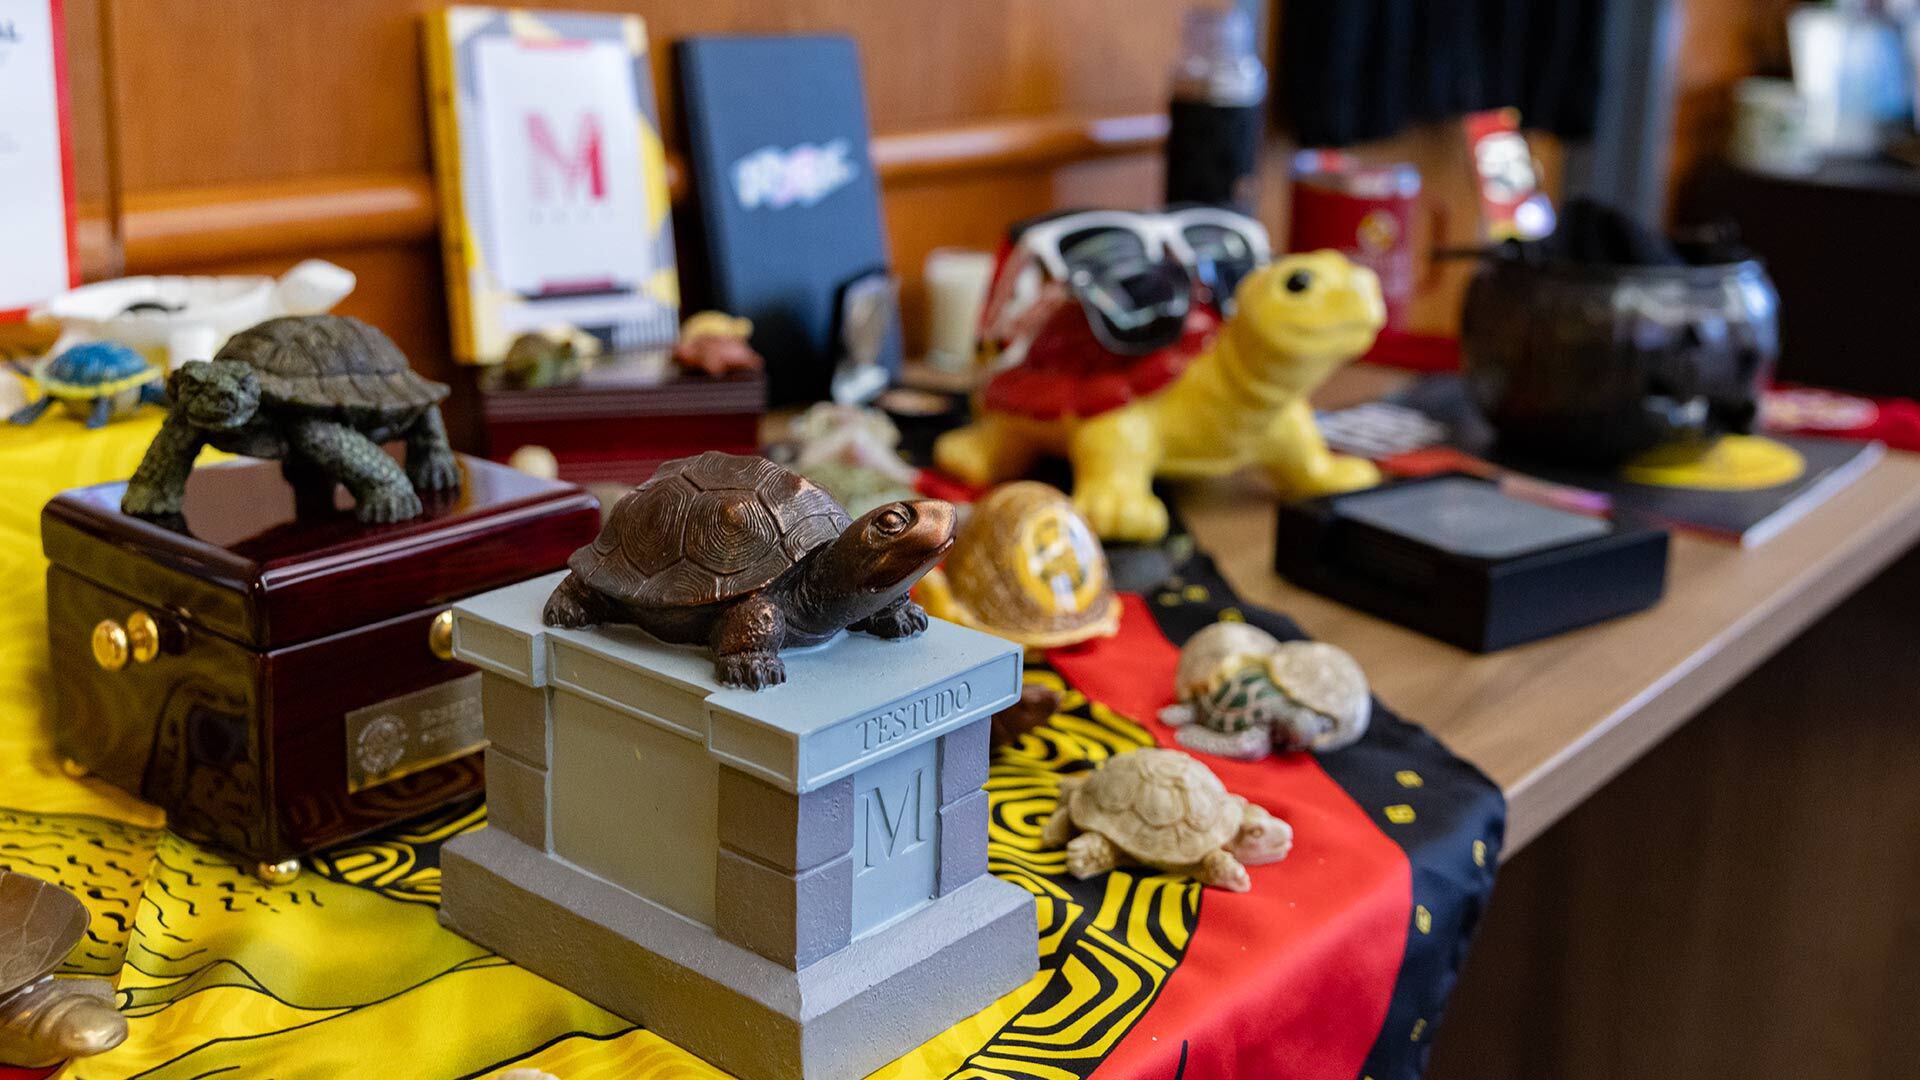 3D printed Testudo and other turtle figurines on a table